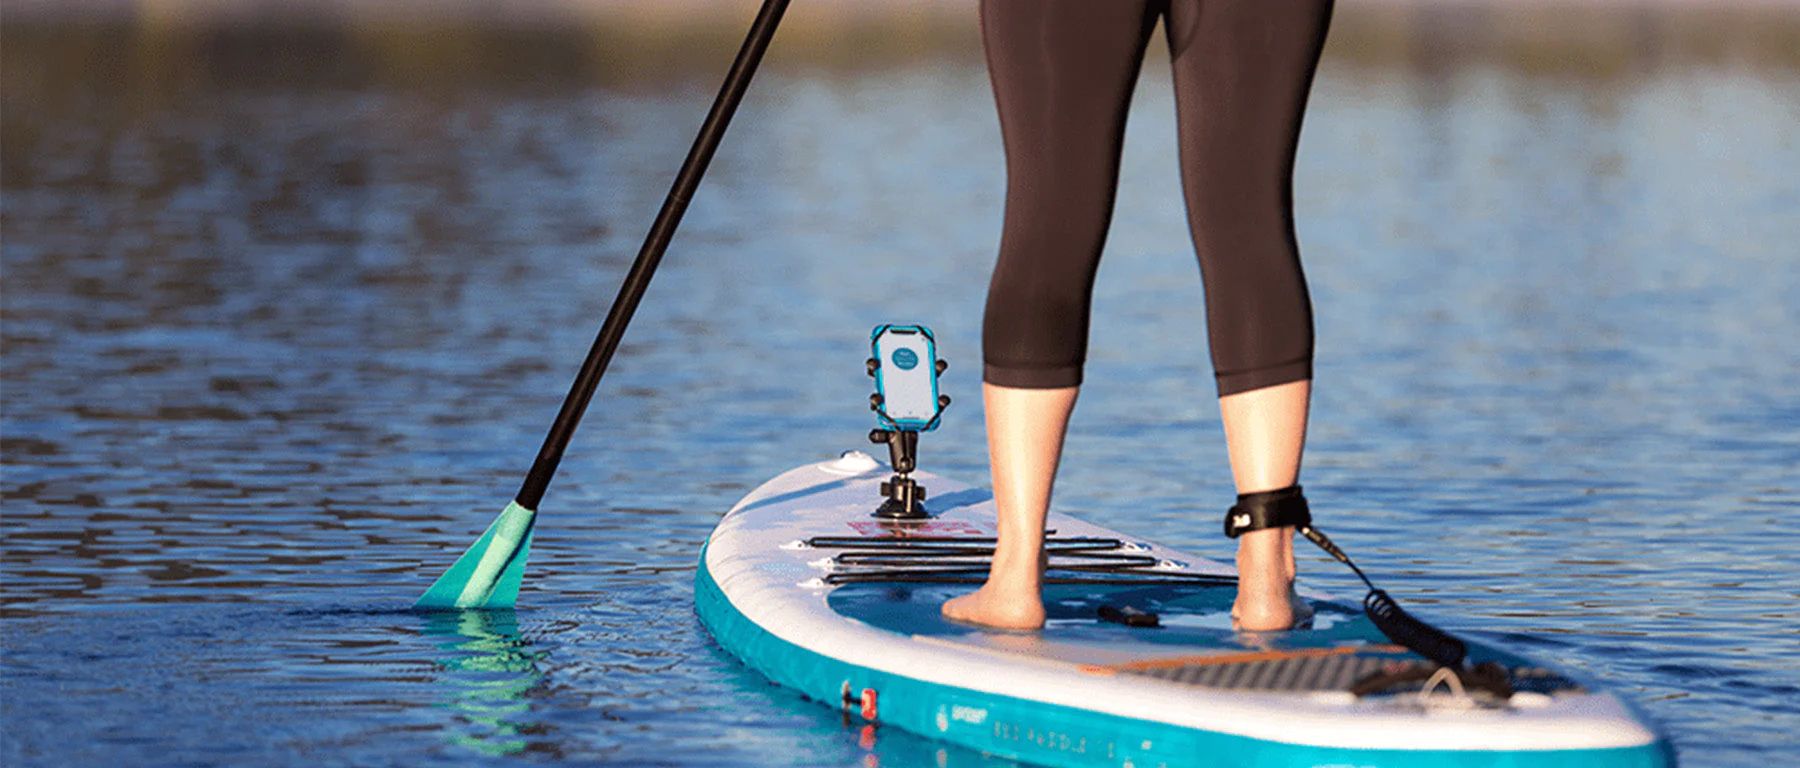 Ensuring Safety: Choosing A Waterproof Holder For Your Phone While Paddleboarding